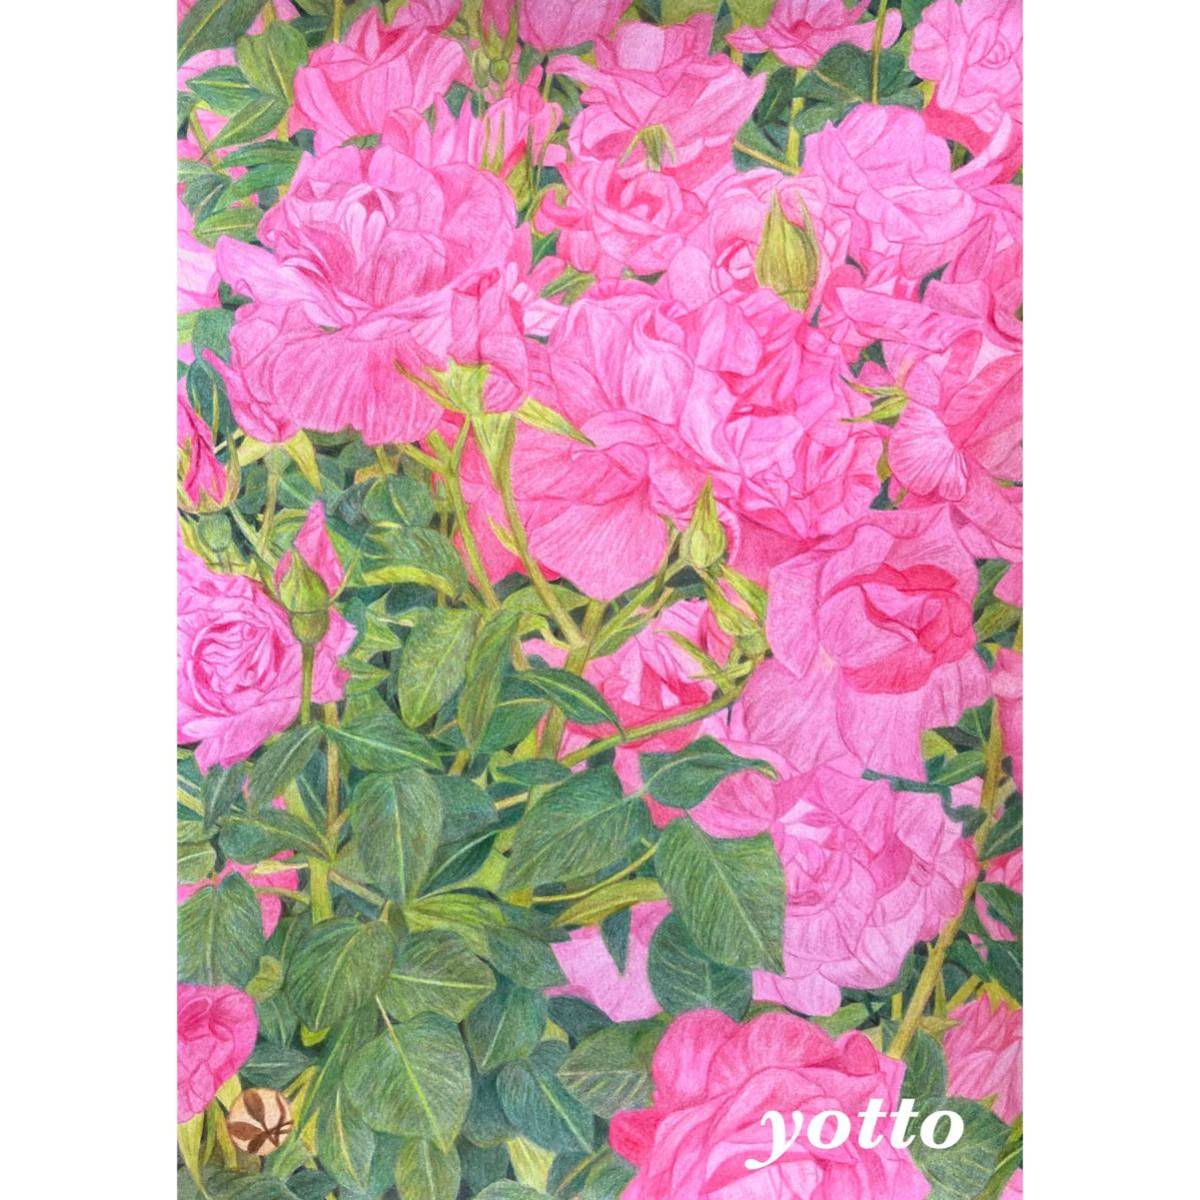 Colored pencil drawing Landscape with Roses(6) A4 size with frame◇◆Hand-drawn◇Original drawing◆Yotto◇, artwork, painting, pencil drawing, charcoal drawing